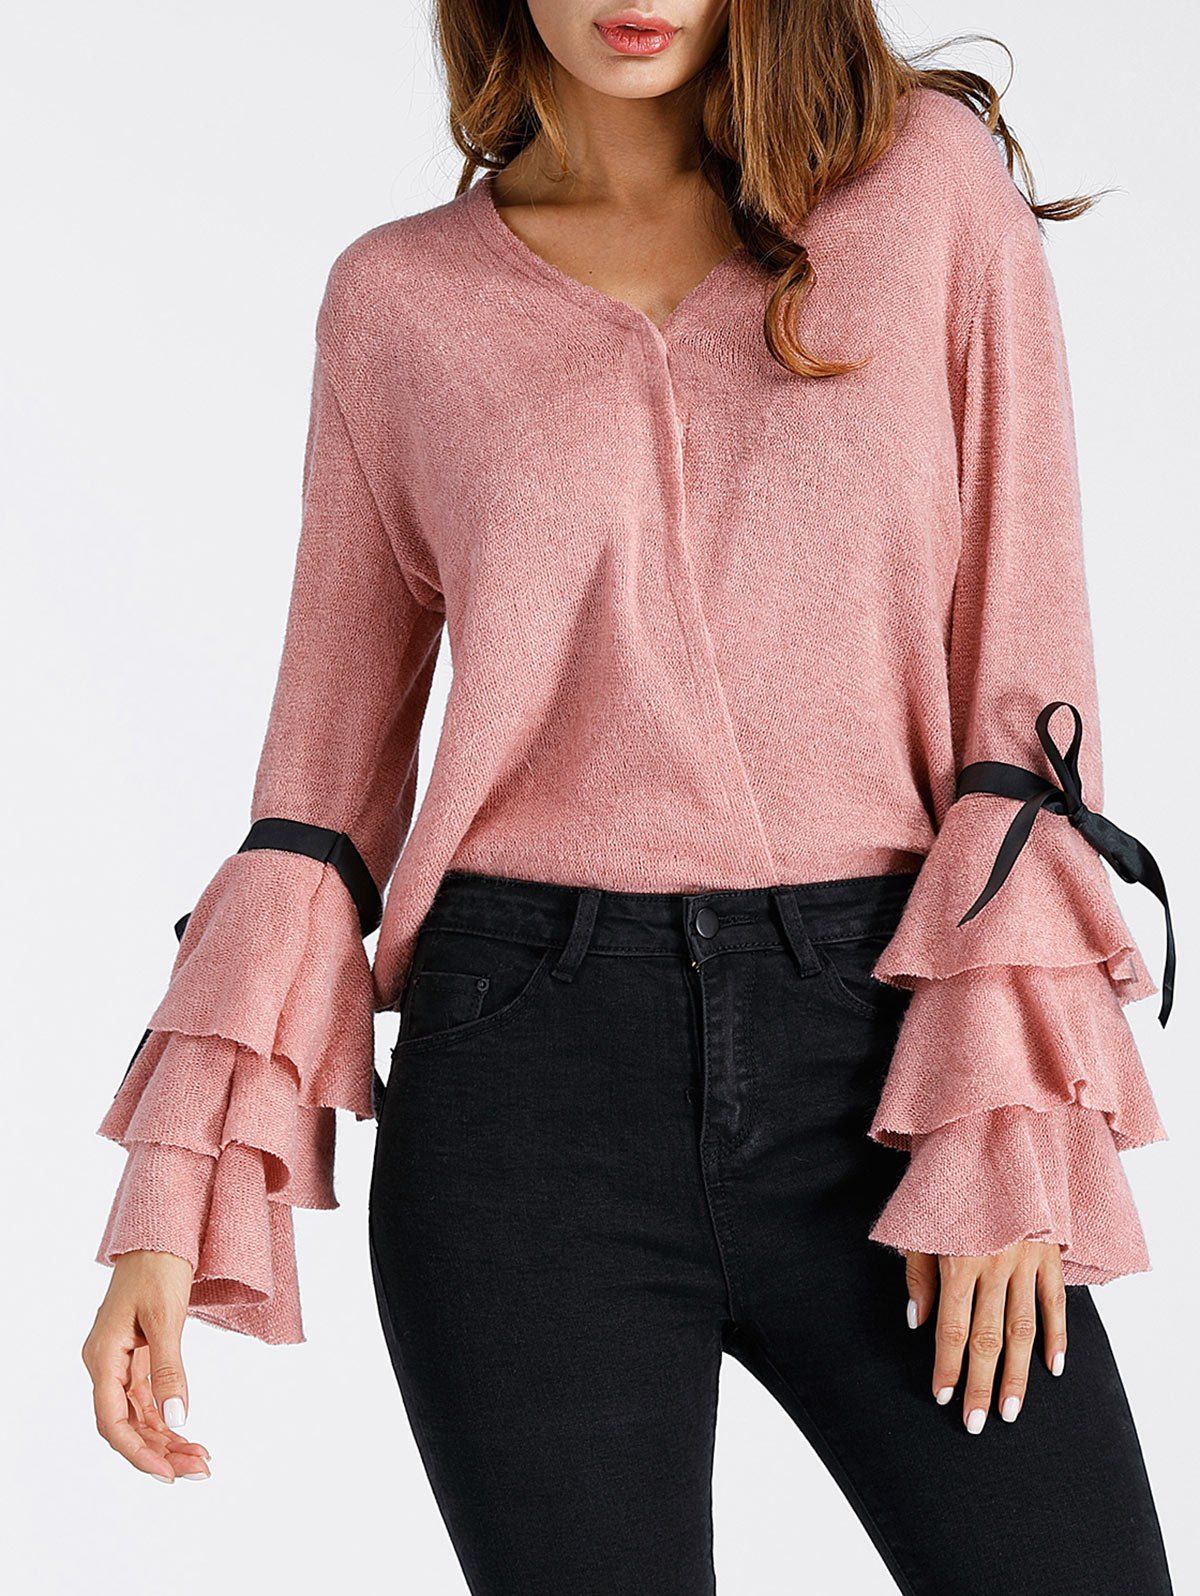 V Neck Layered Bell Sleeve Pullover Sweater - PINK L